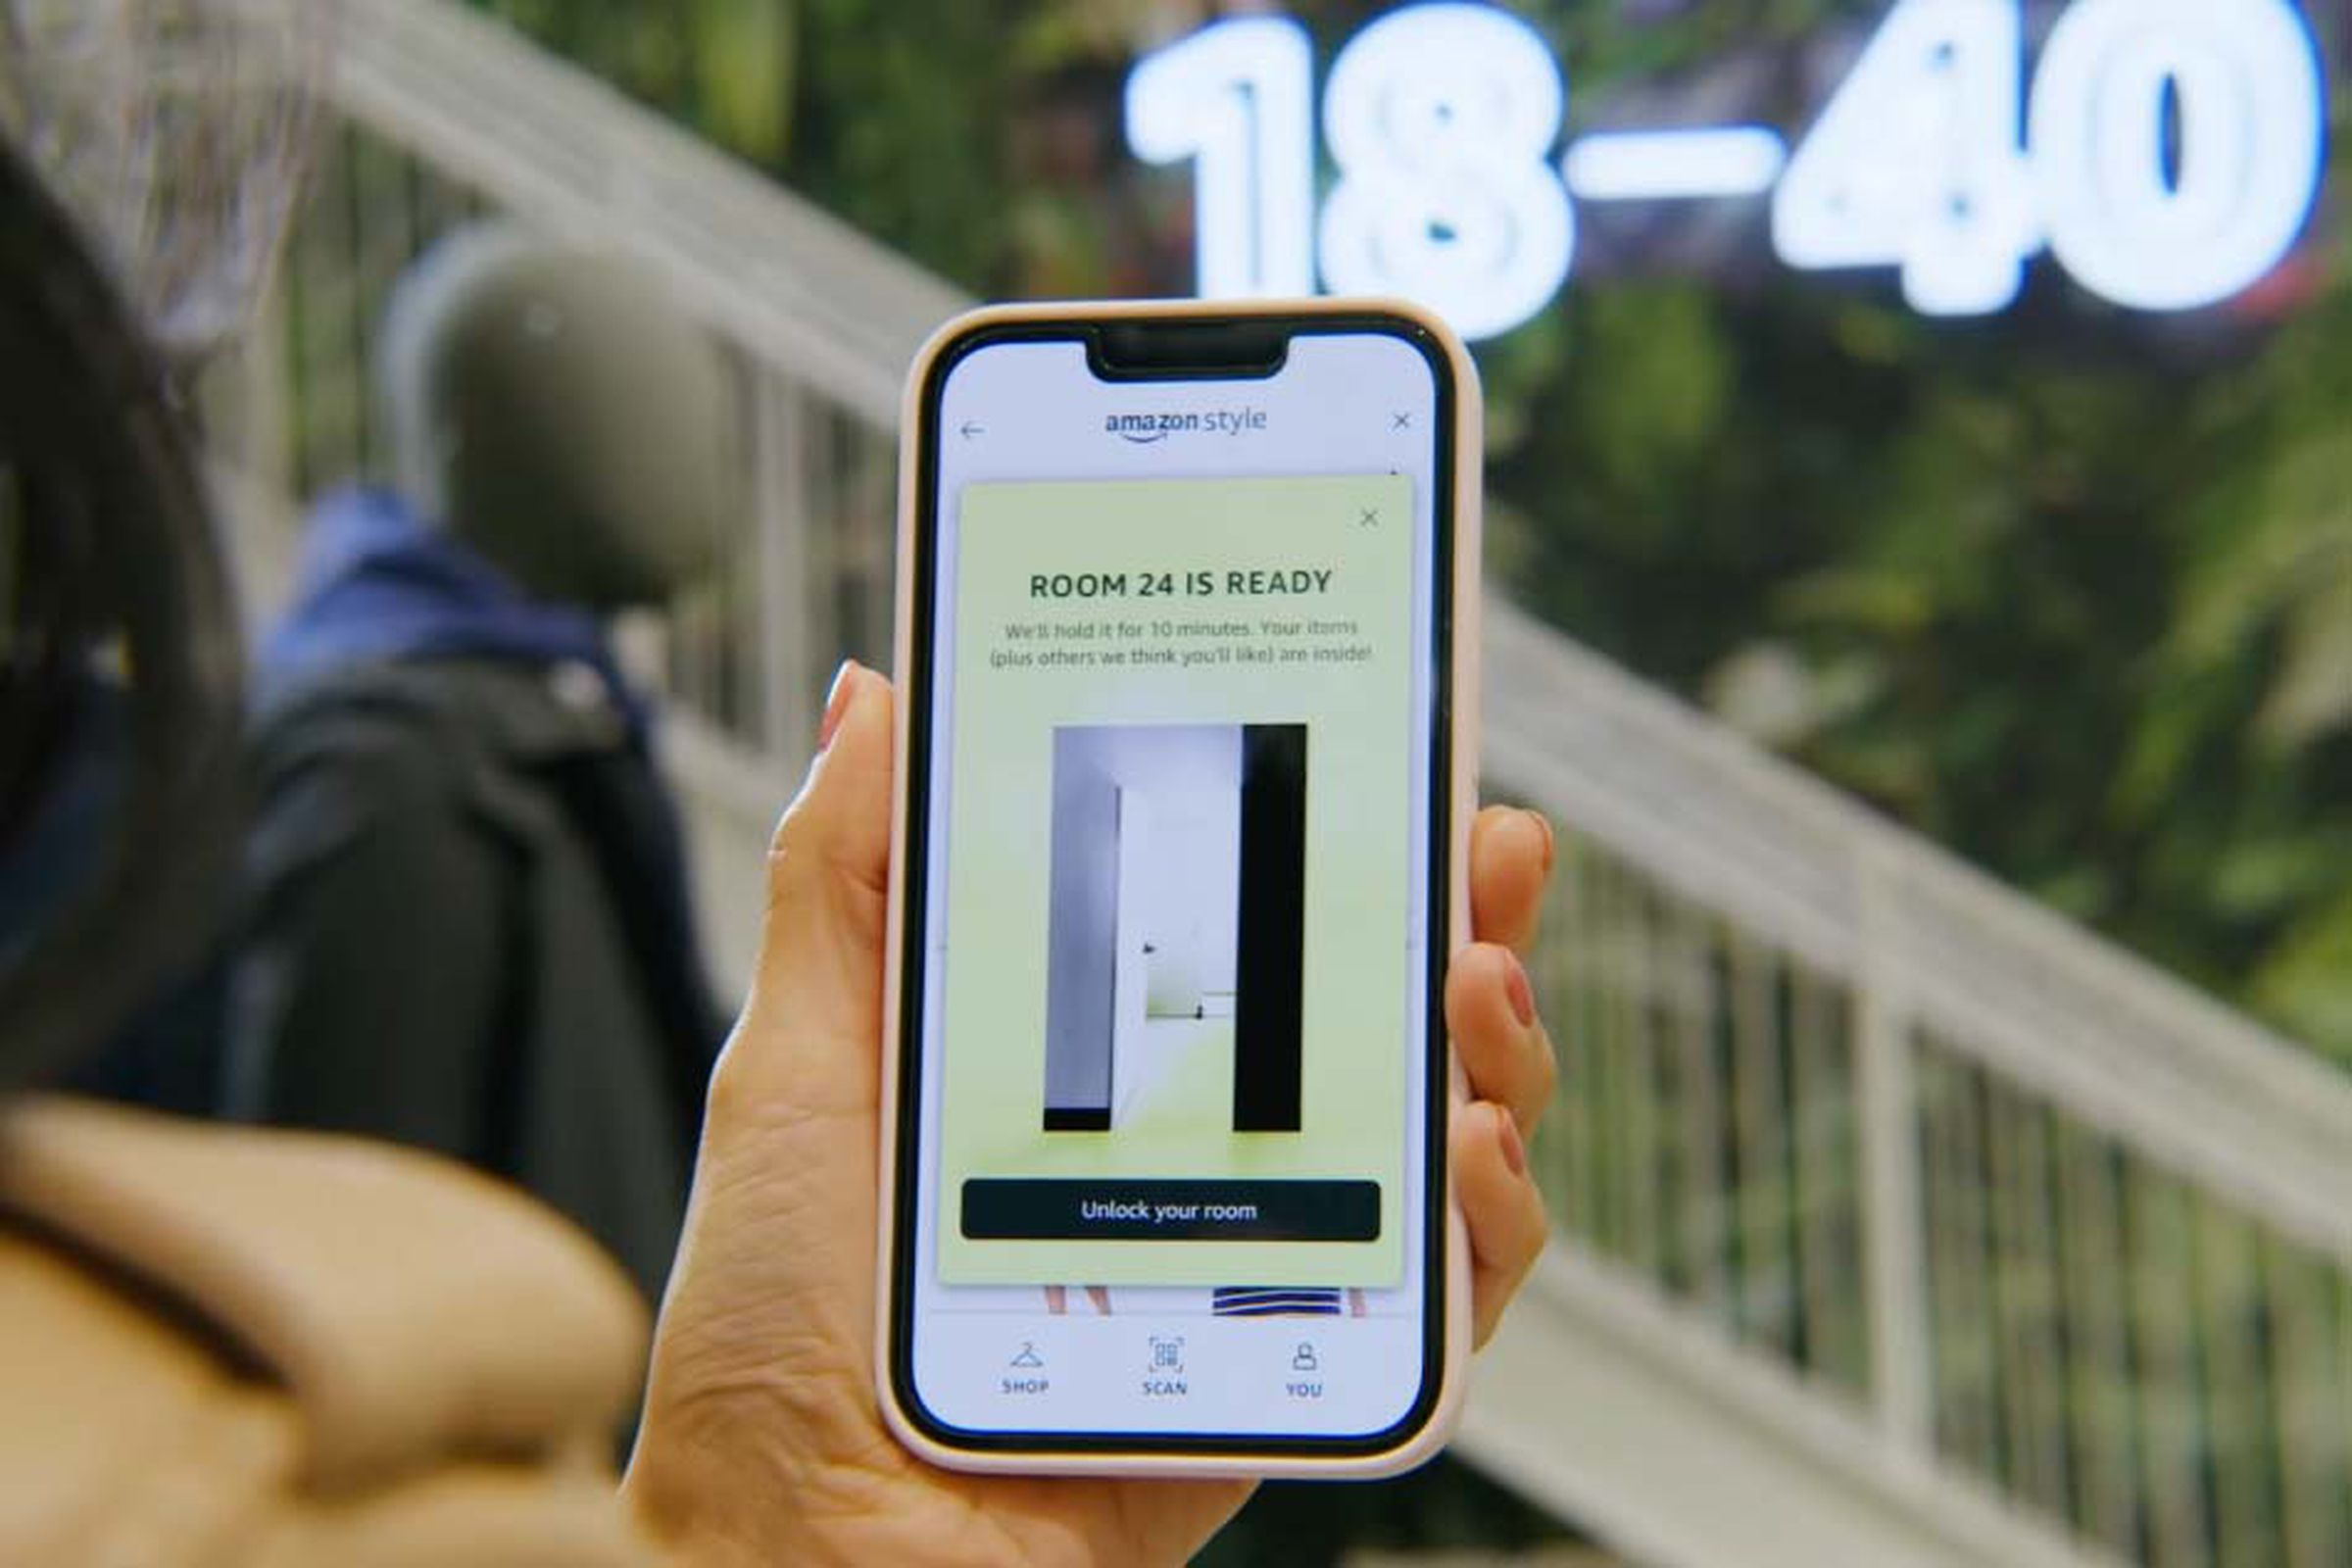 A video shows Amazon’s app alerting a customer when their fitting room is ready.